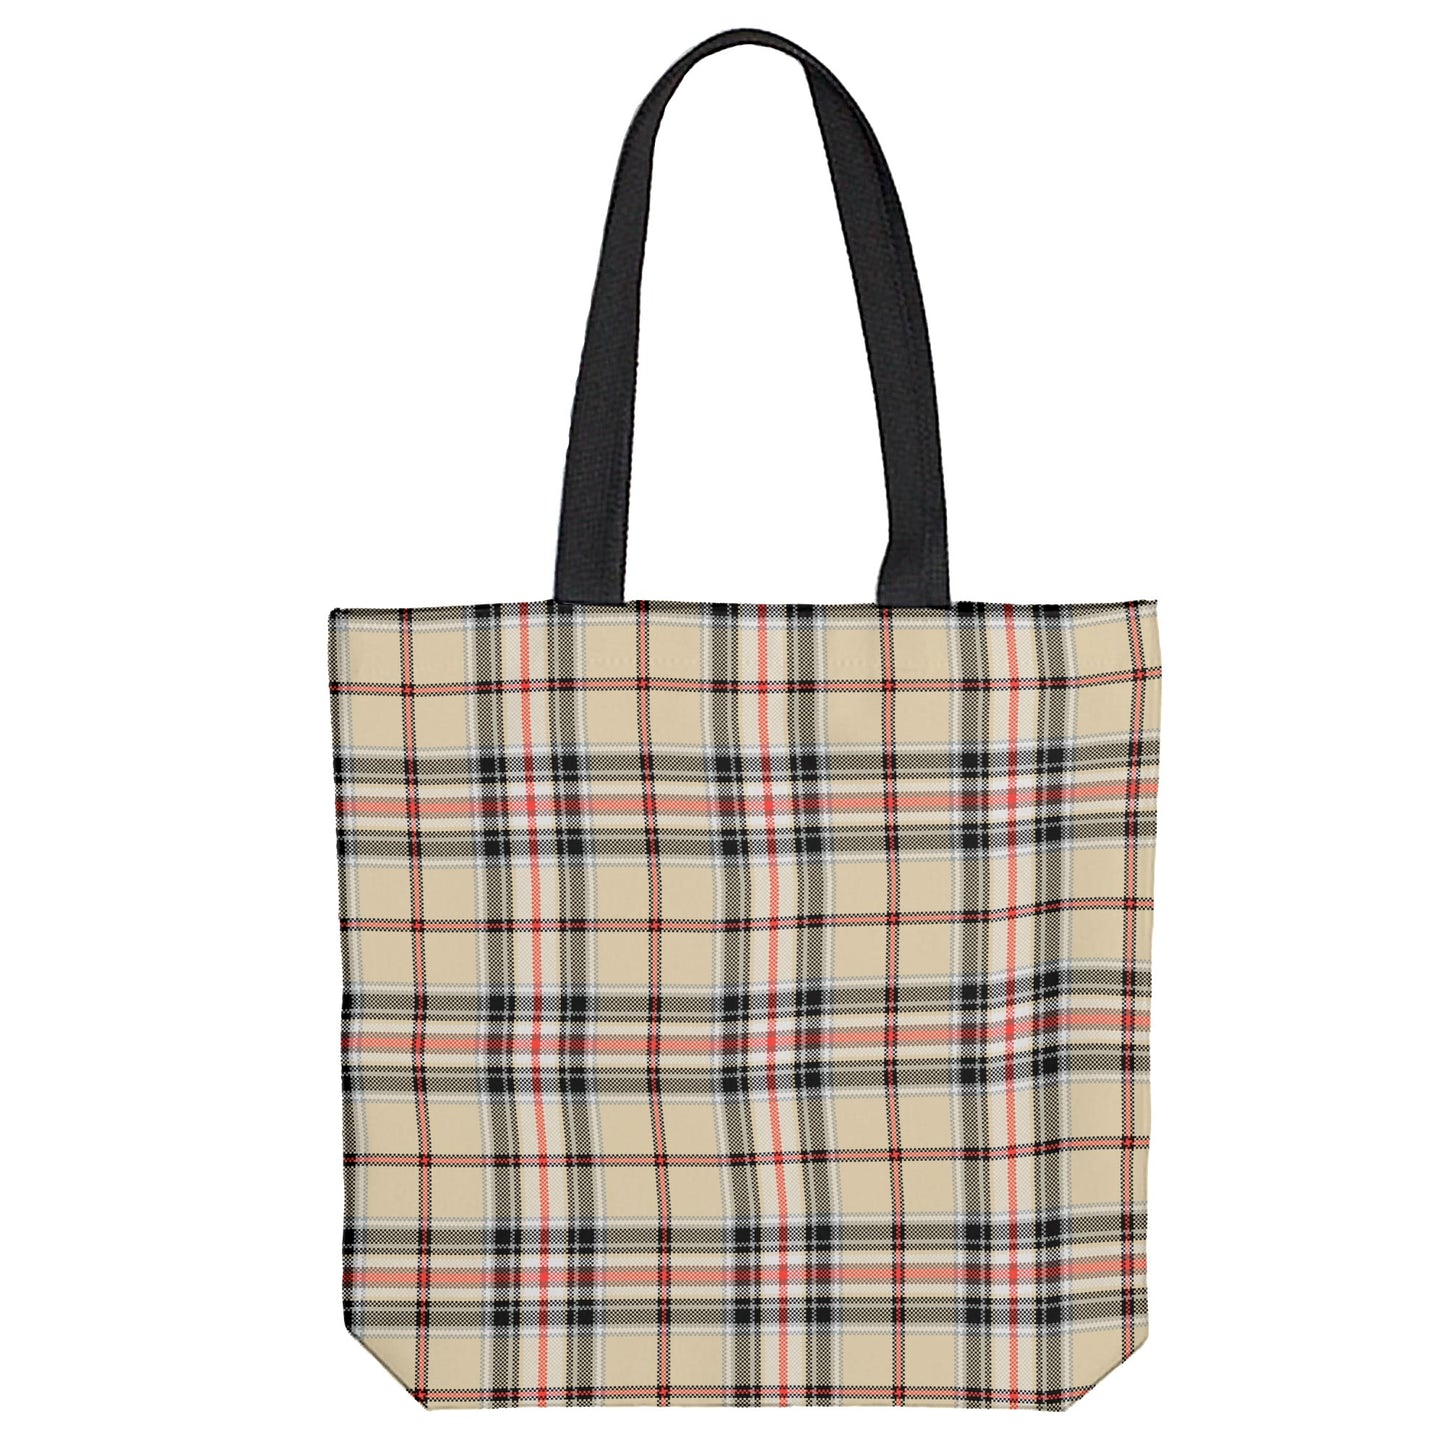 Chic Plaid Tote Bag - shades and stripes of gold, yellow, black, and red. The dominant color in this design is yellow or gold.